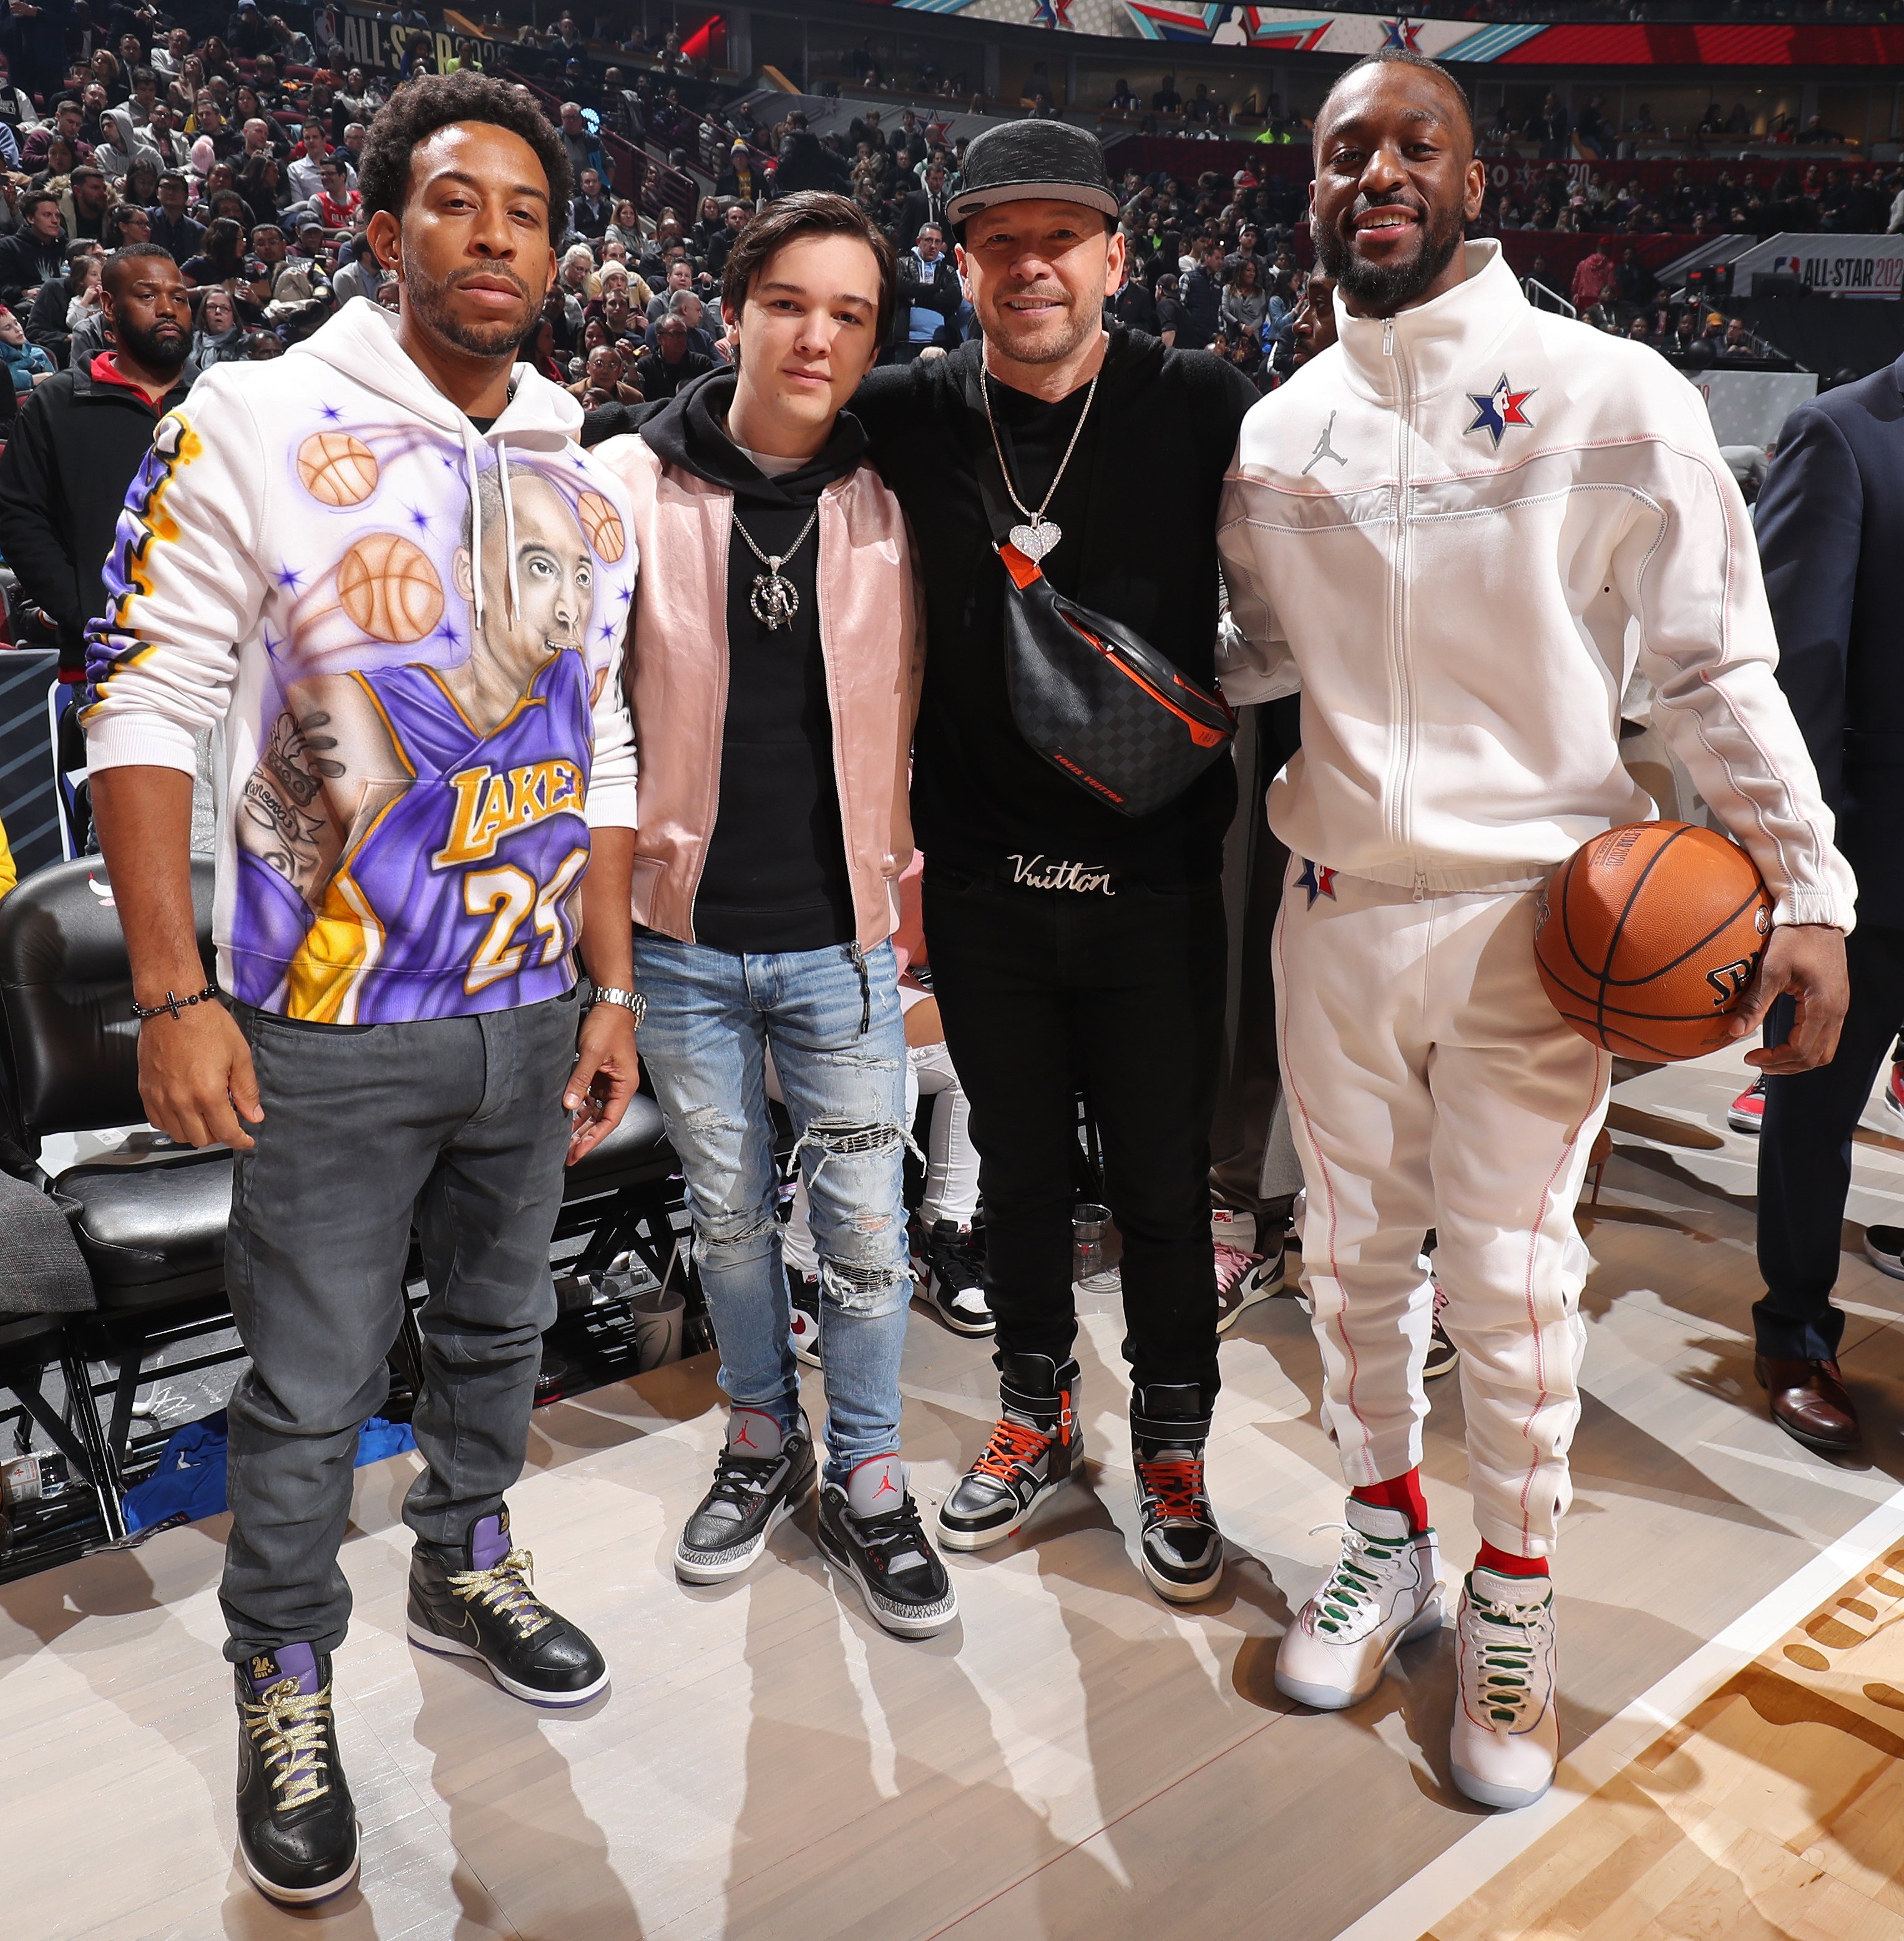 Ludacris, Elijah Wahlberg, Donnie Wahlberg, and Kemba Walker pose for a photo during the 69th NBA All-Star Game at the United Center on February 16, 2020, in Chicago, Illinois. | Source: Getty Images